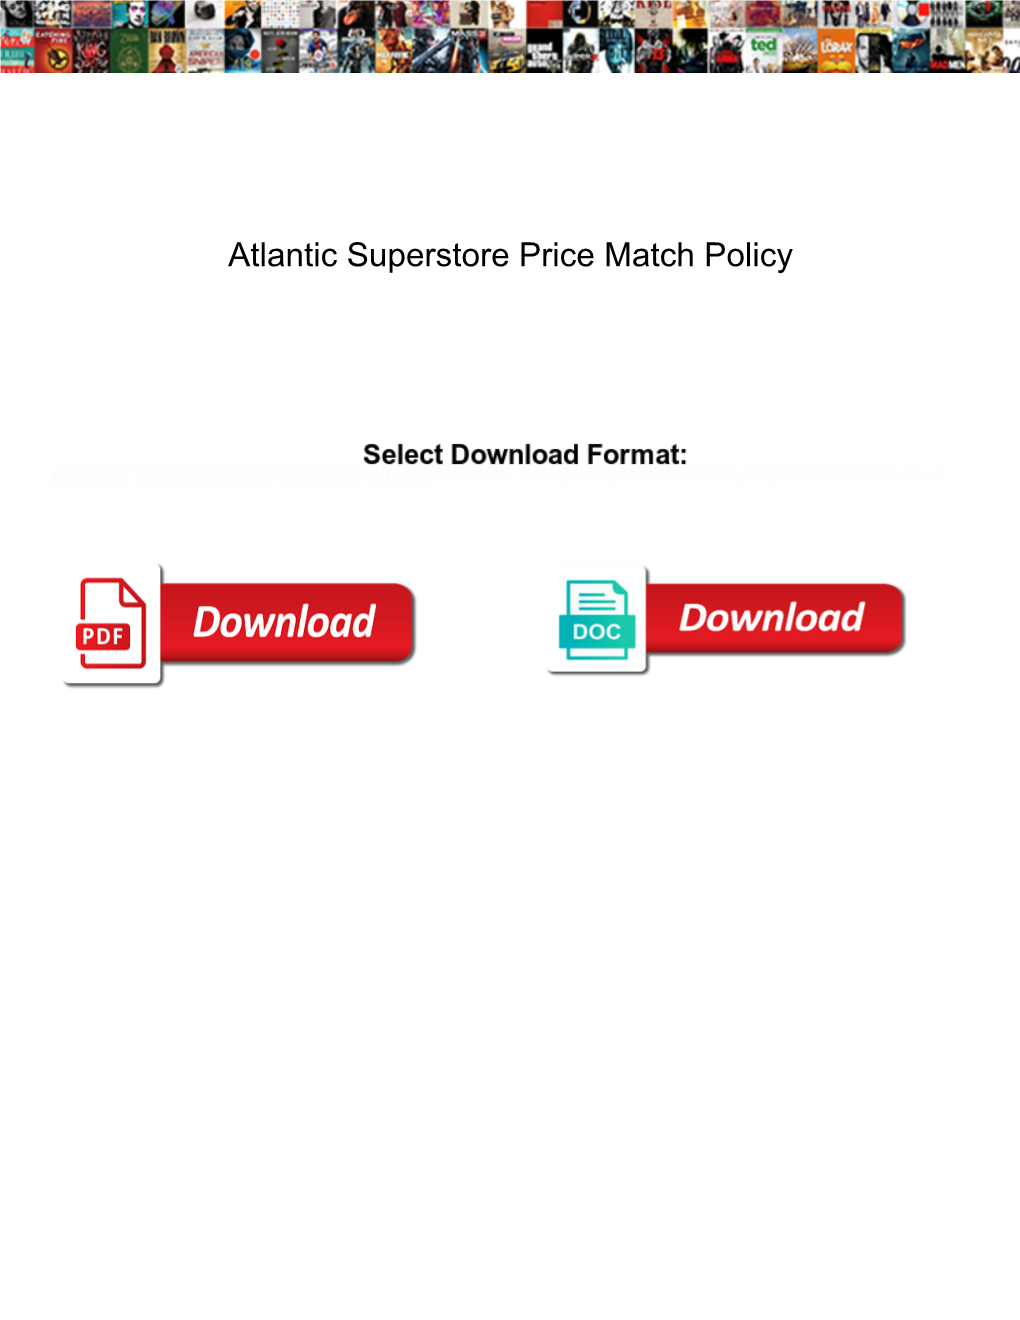 Atlantic Superstore Price Match Policy